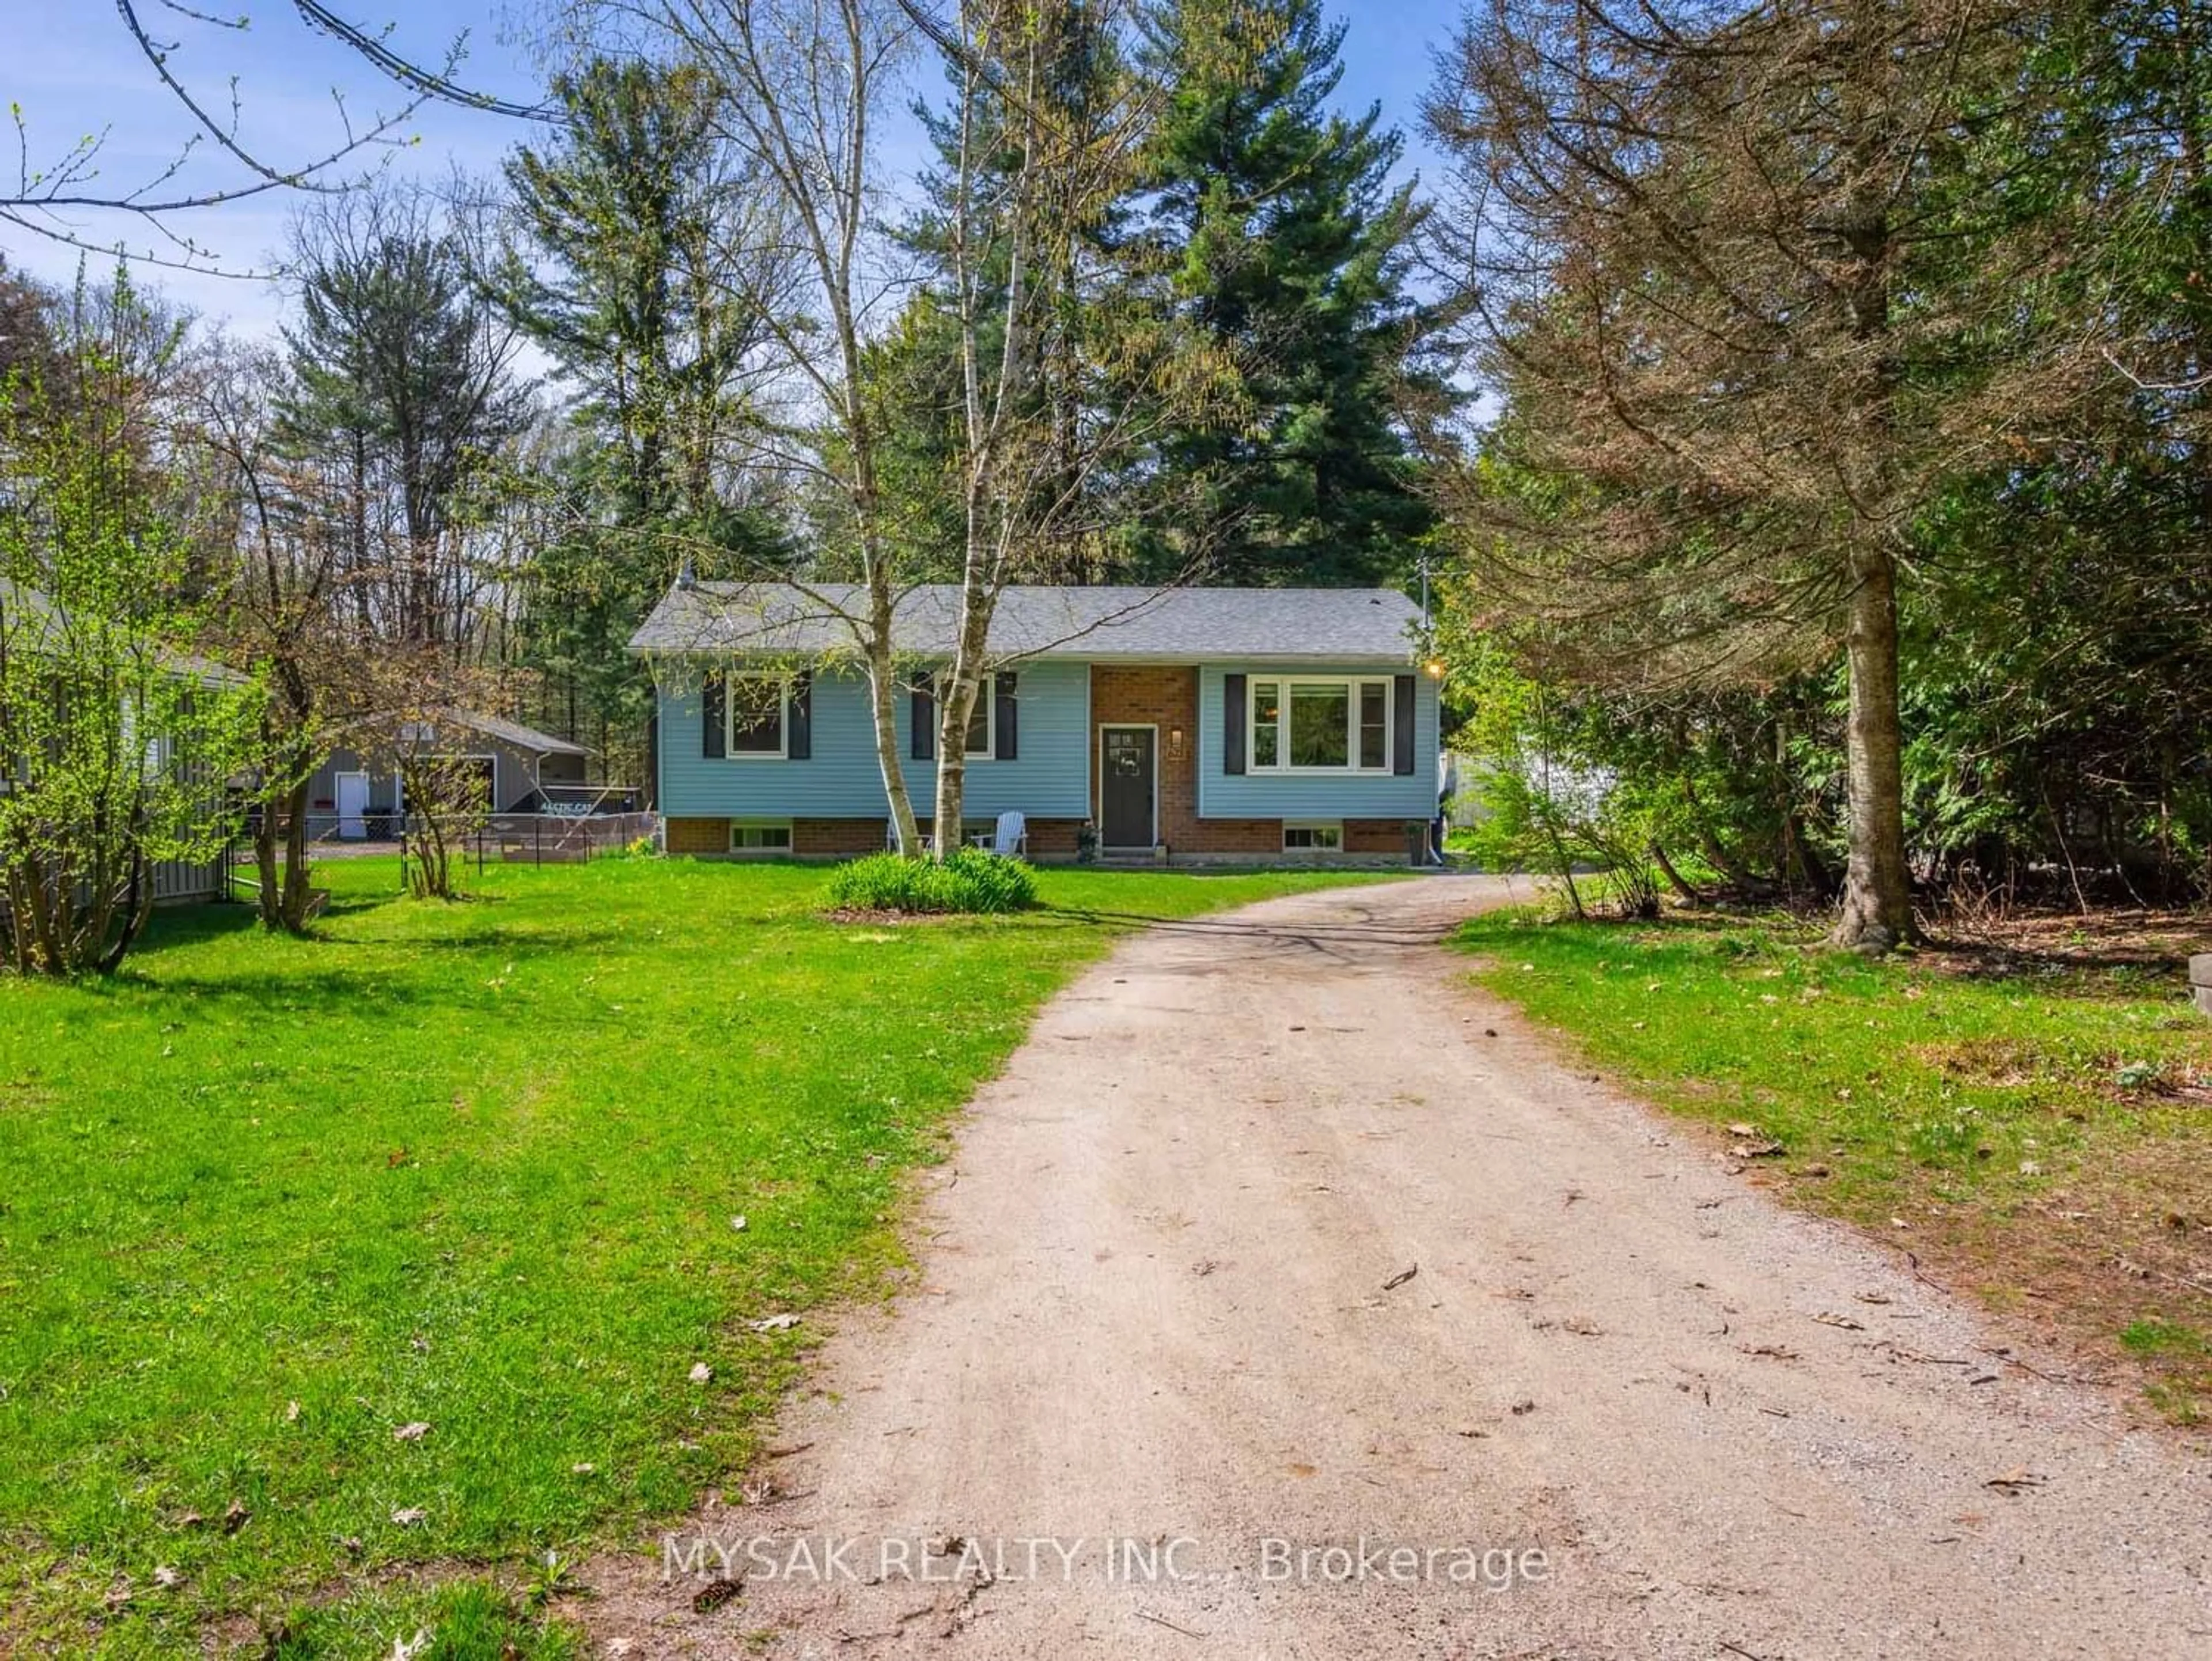 Cottage for 673 Pinegrove Ave, Innisfil Ontario L9S 2K4